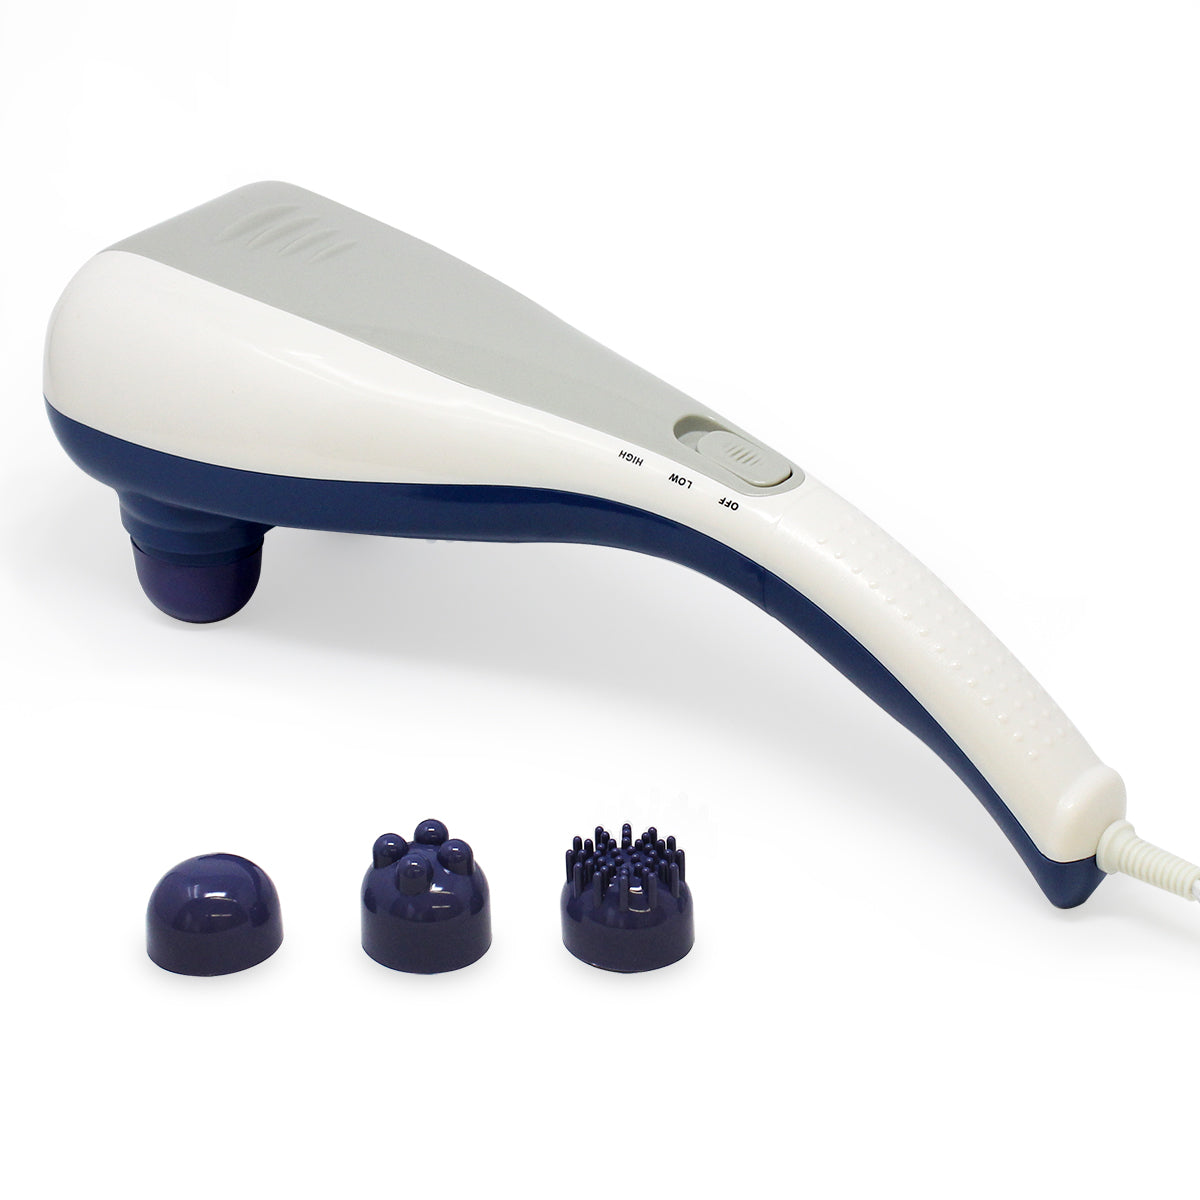 Dual Tapper Handheld Dual Head Percussion Massager